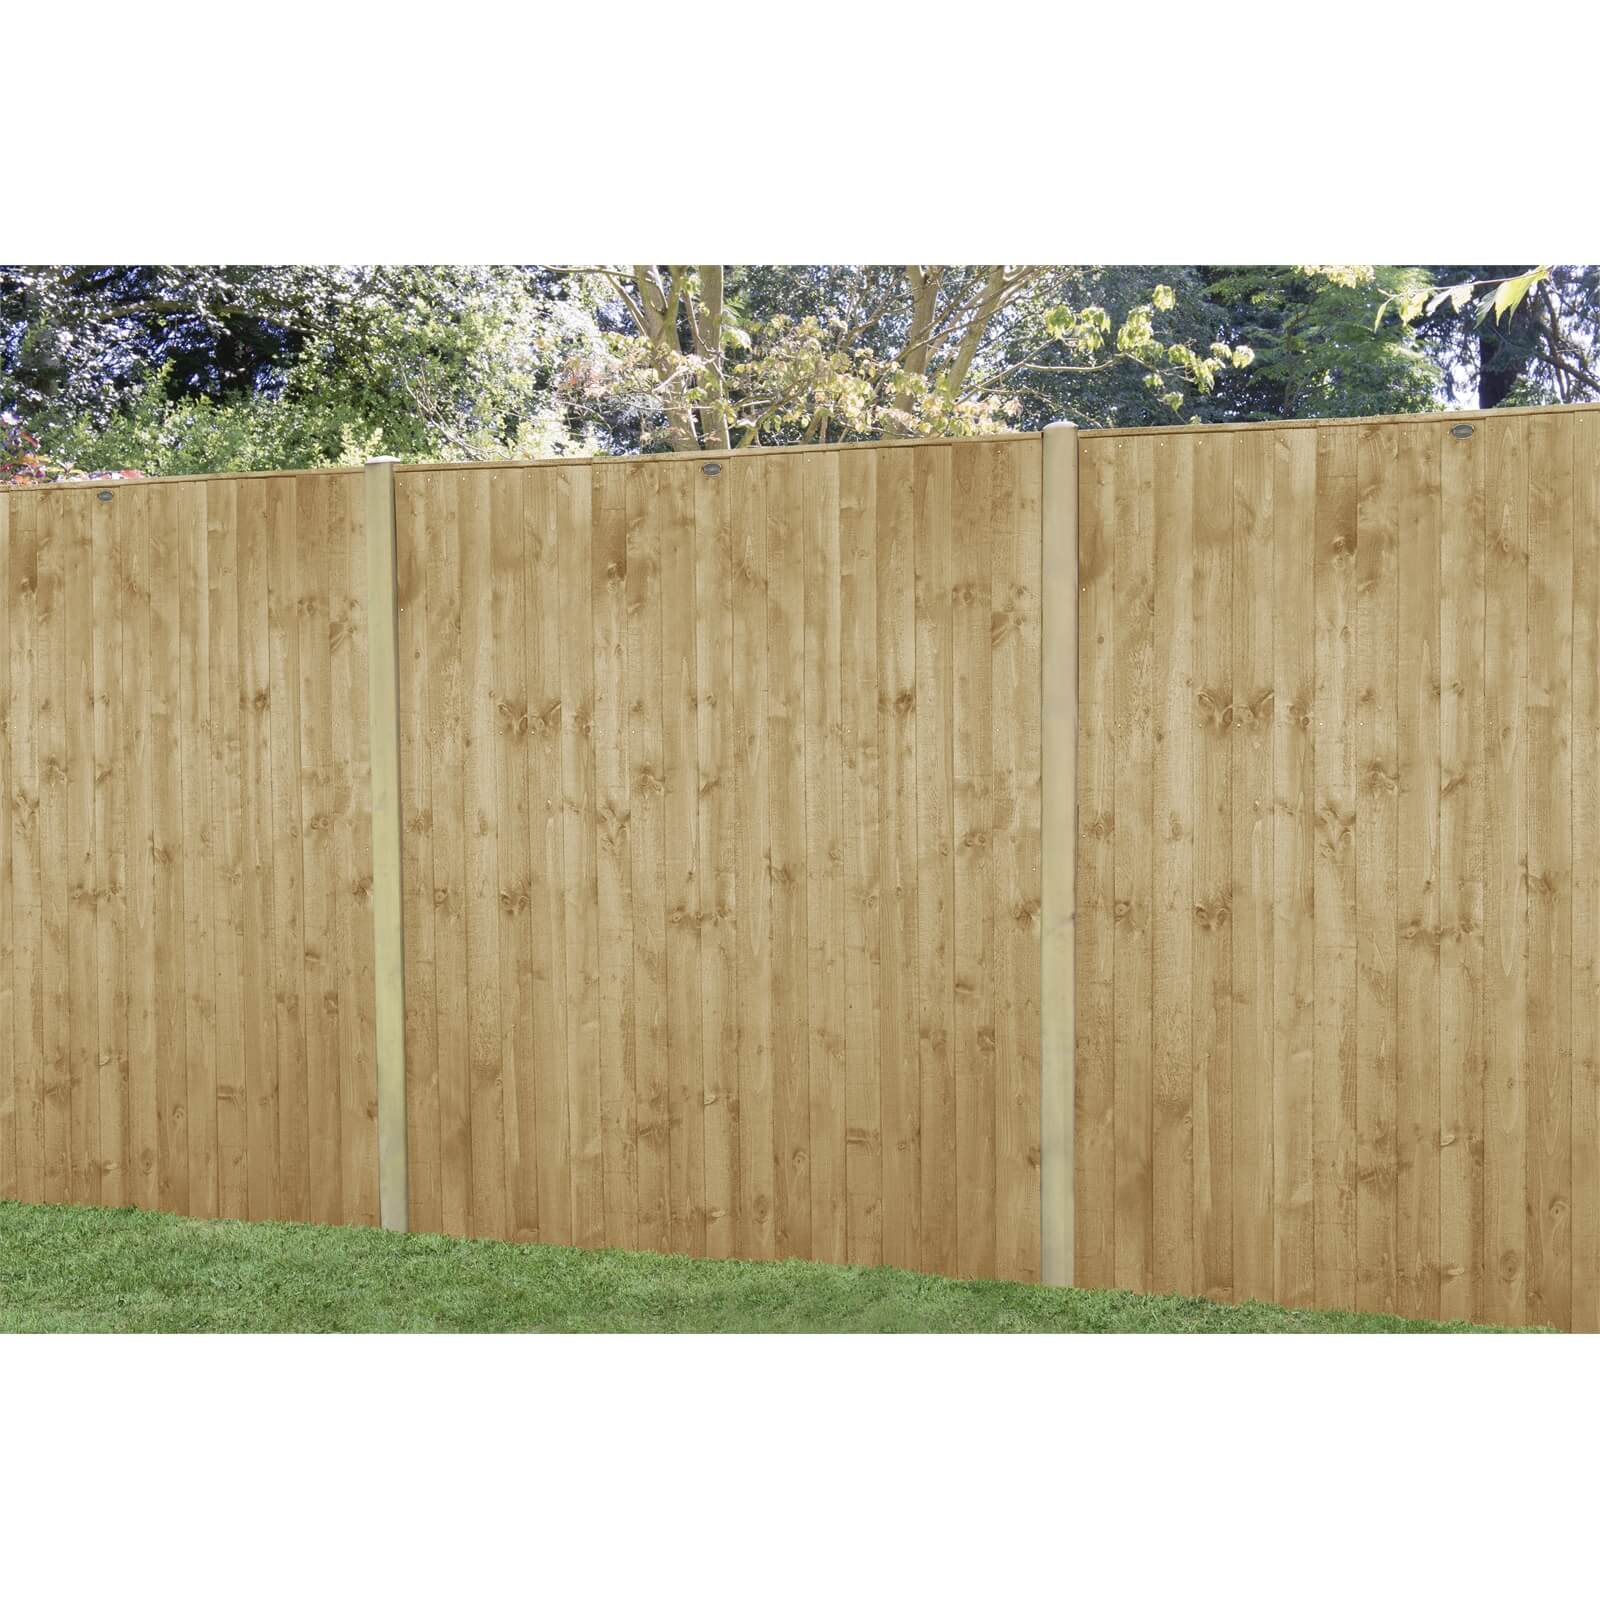 6ft x 6ft (1.83m x 1.85m) Pressure Treated Featheredge Fence Panel - Pack of 20